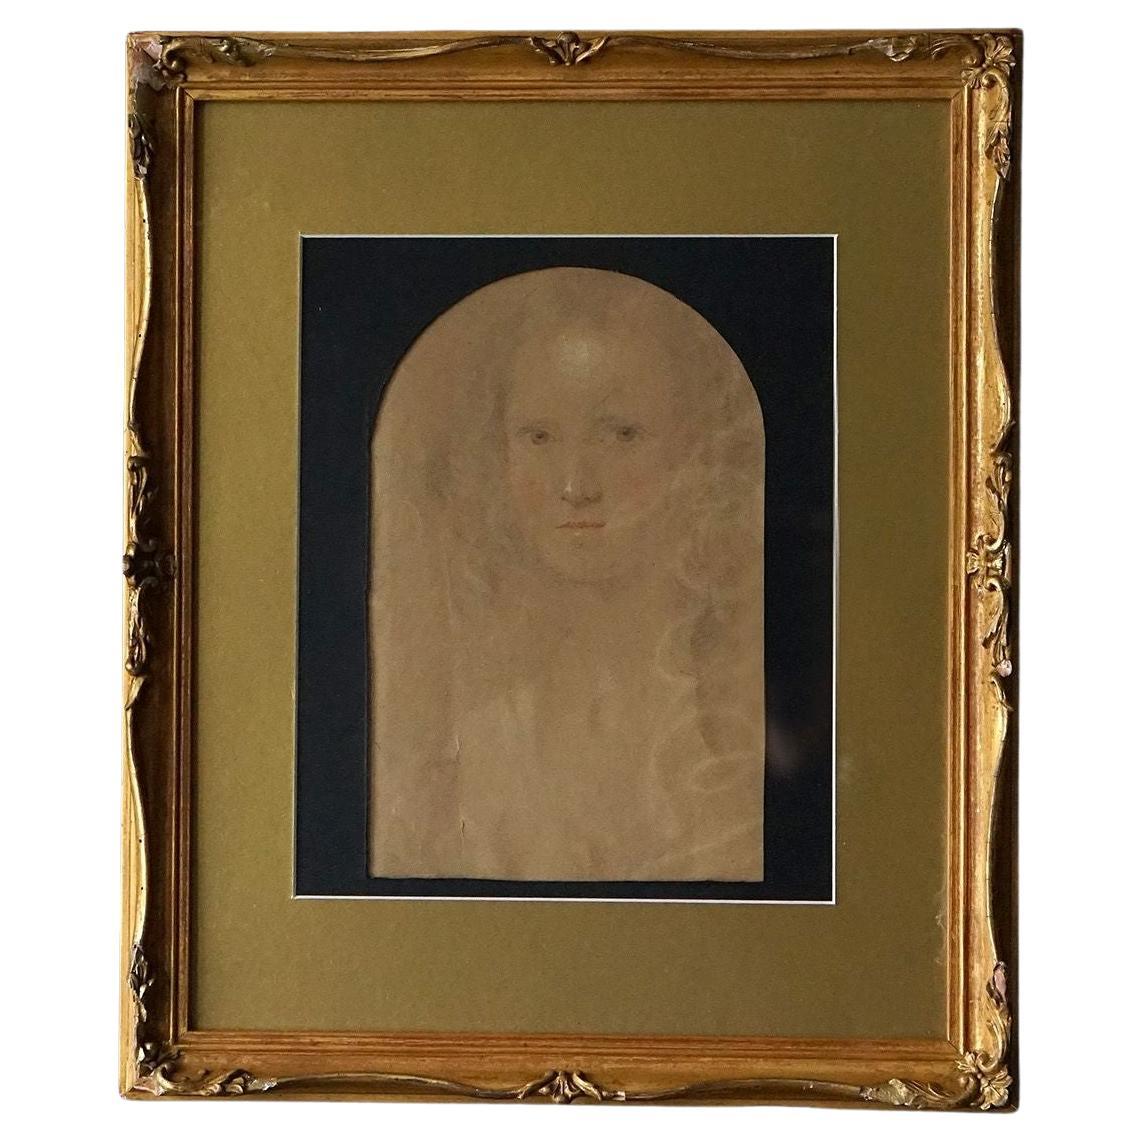 Ghostly Portrait Drawing of Girl by George Richmond Ra, 19th Century